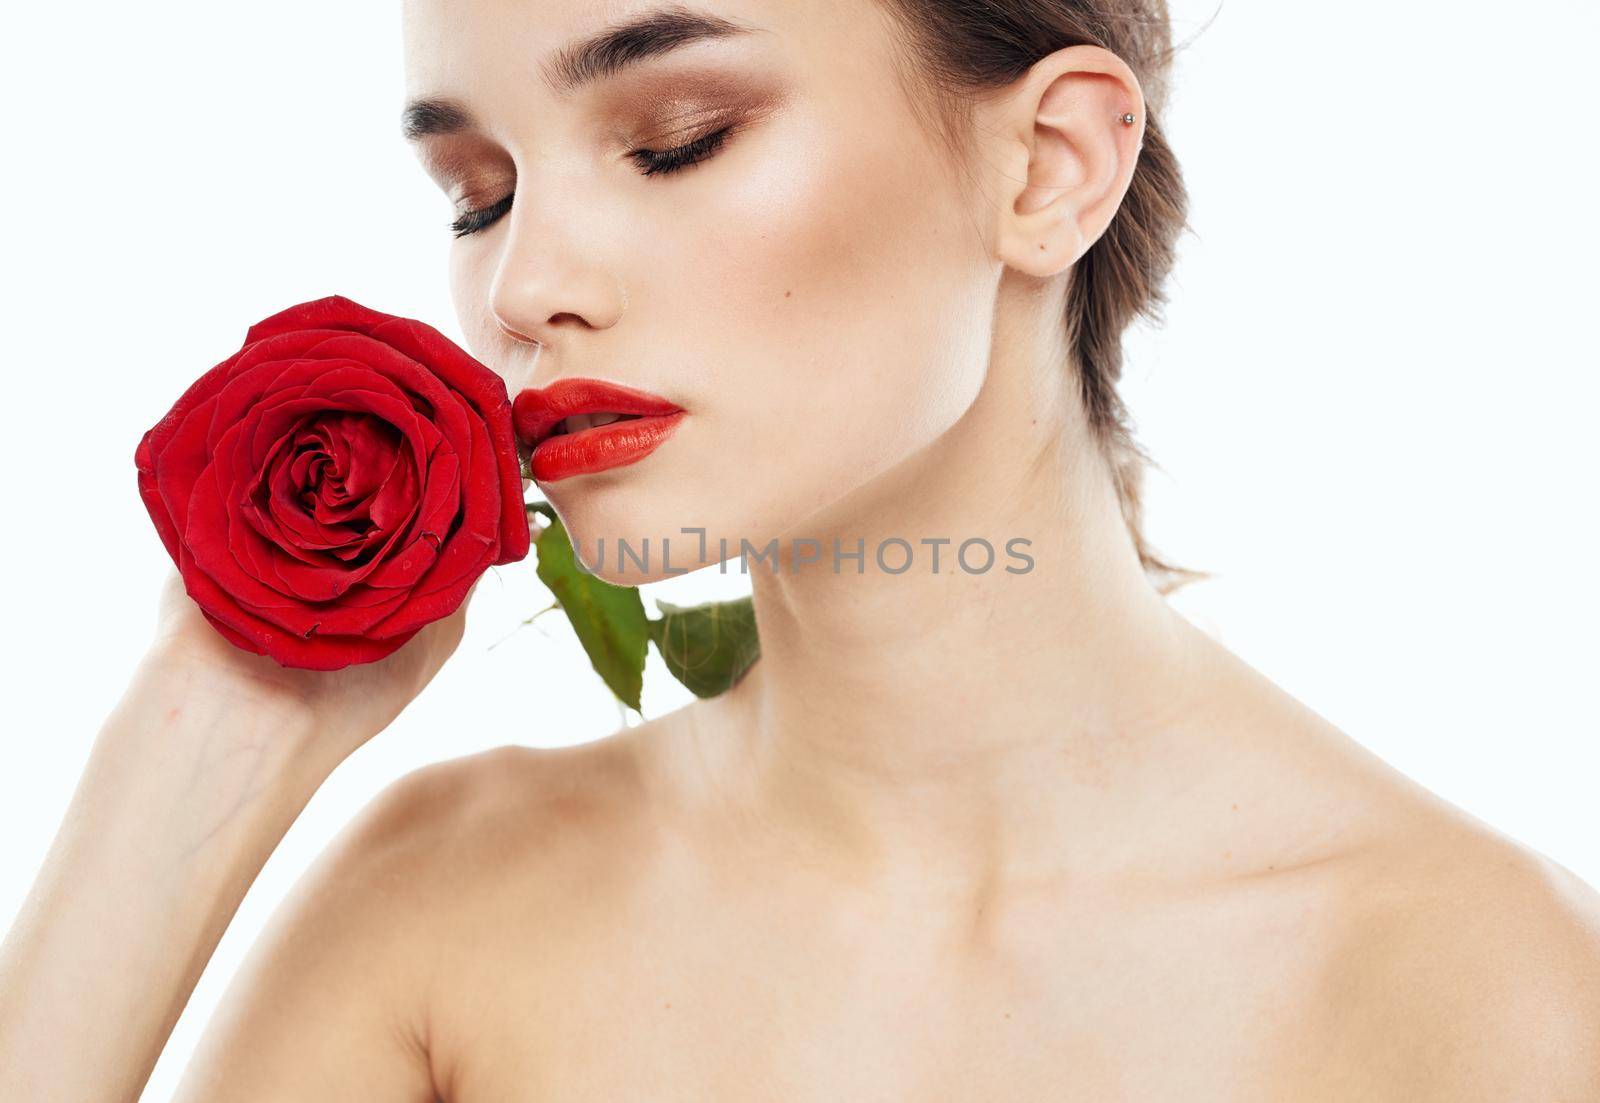 Attractive woman model with bared shoulders and a flower emotion charm by SHOTPRIME